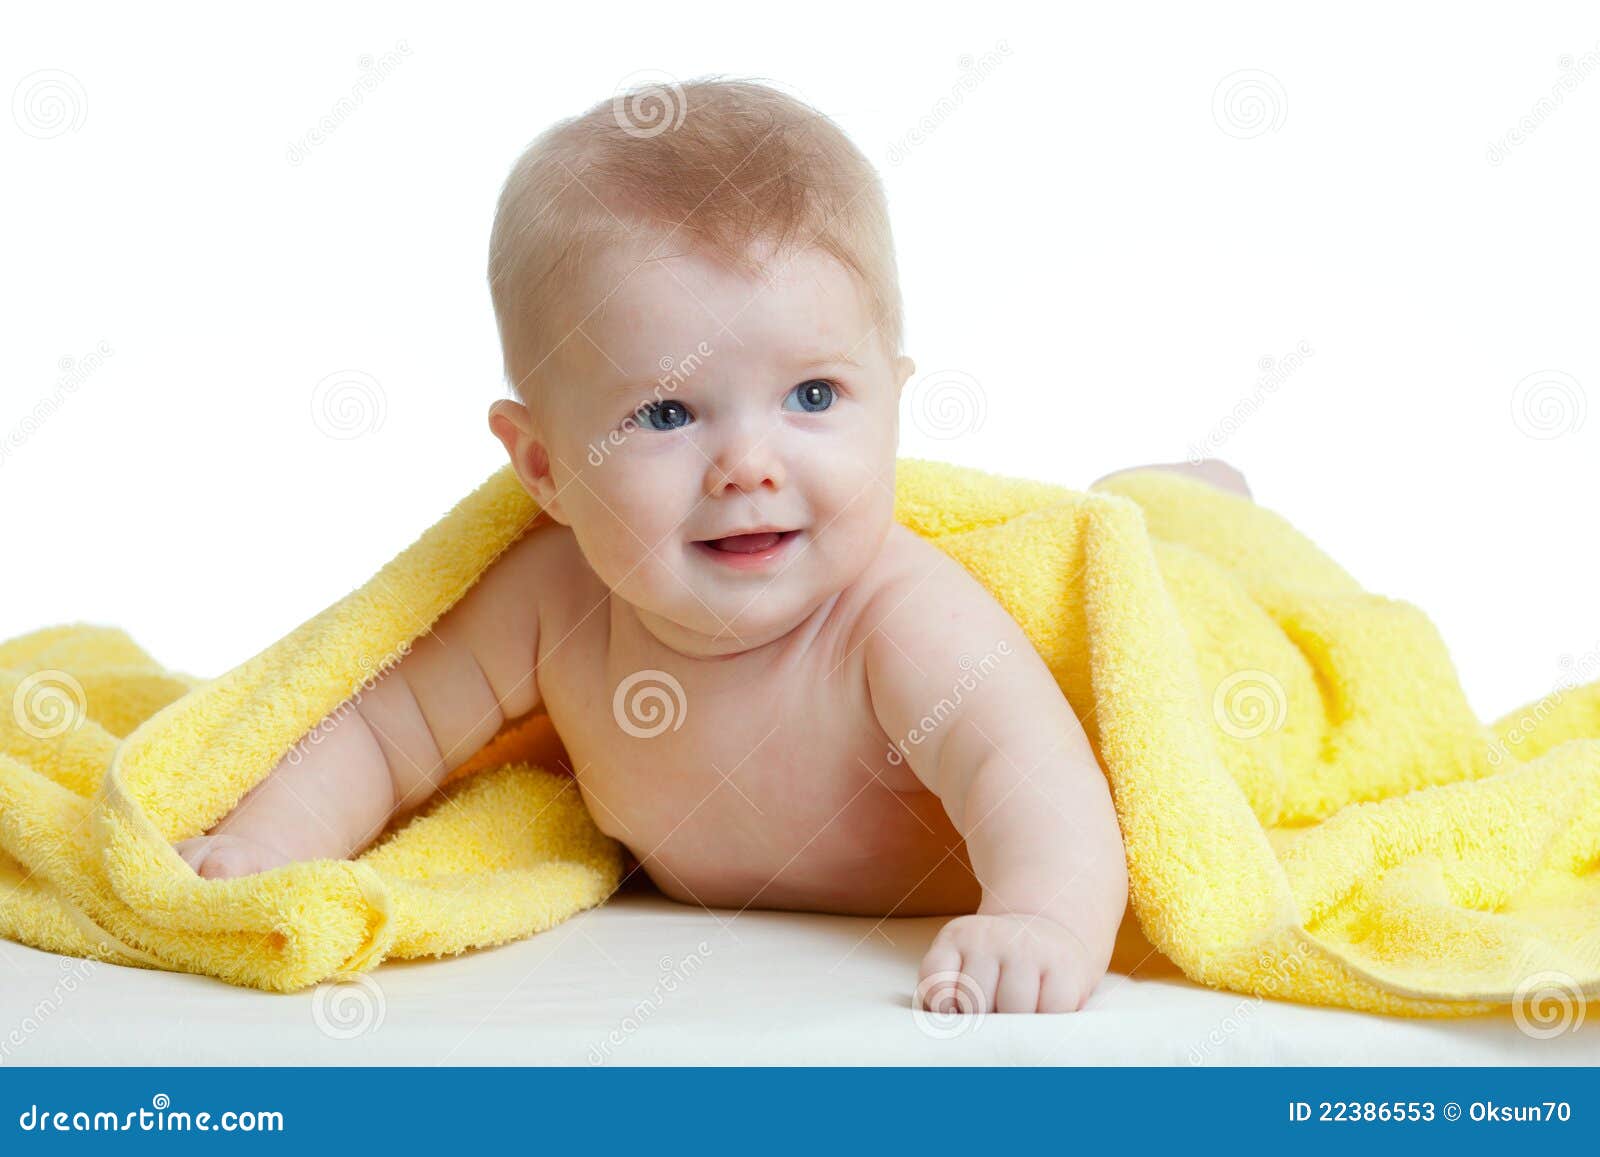 Adorable Happy Baby in Yellow Towel Stock Image - Image of child, funny ...